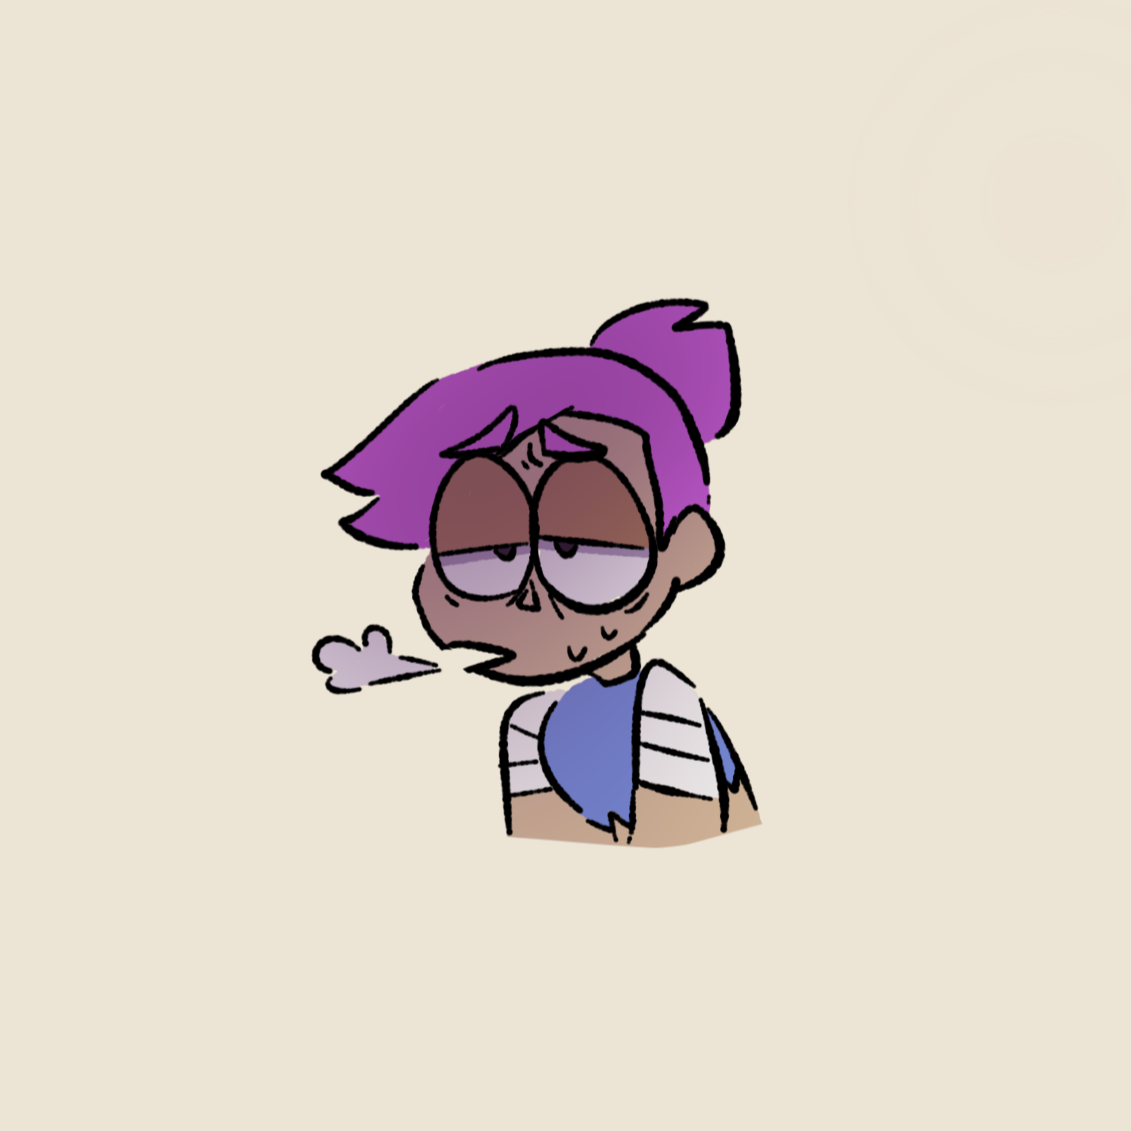 enid is a mood